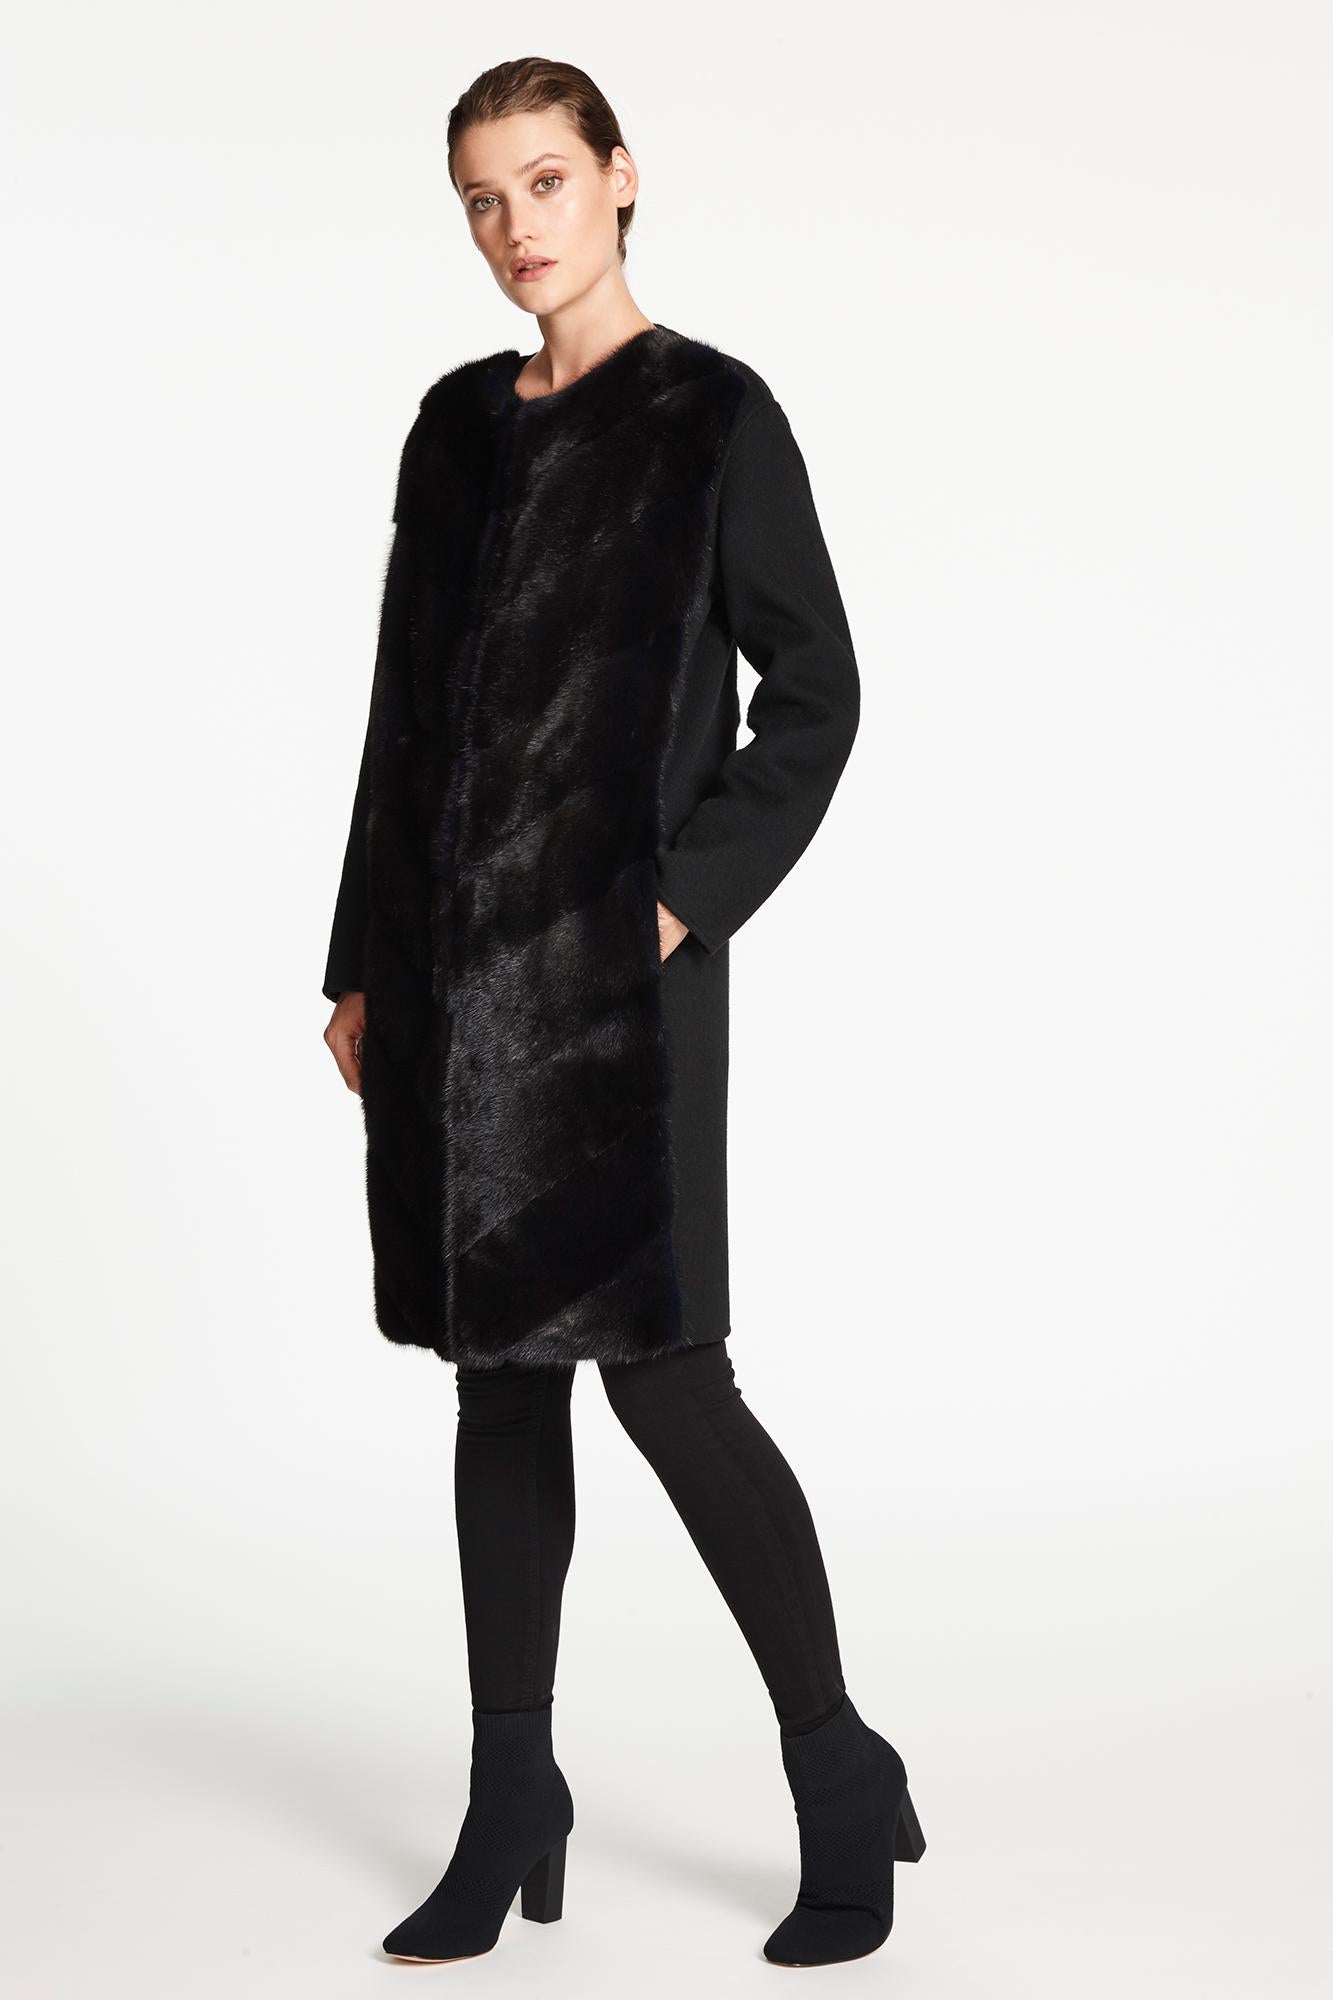 Collarless Coat Cashmere and in Navy Black Mink Fur 1